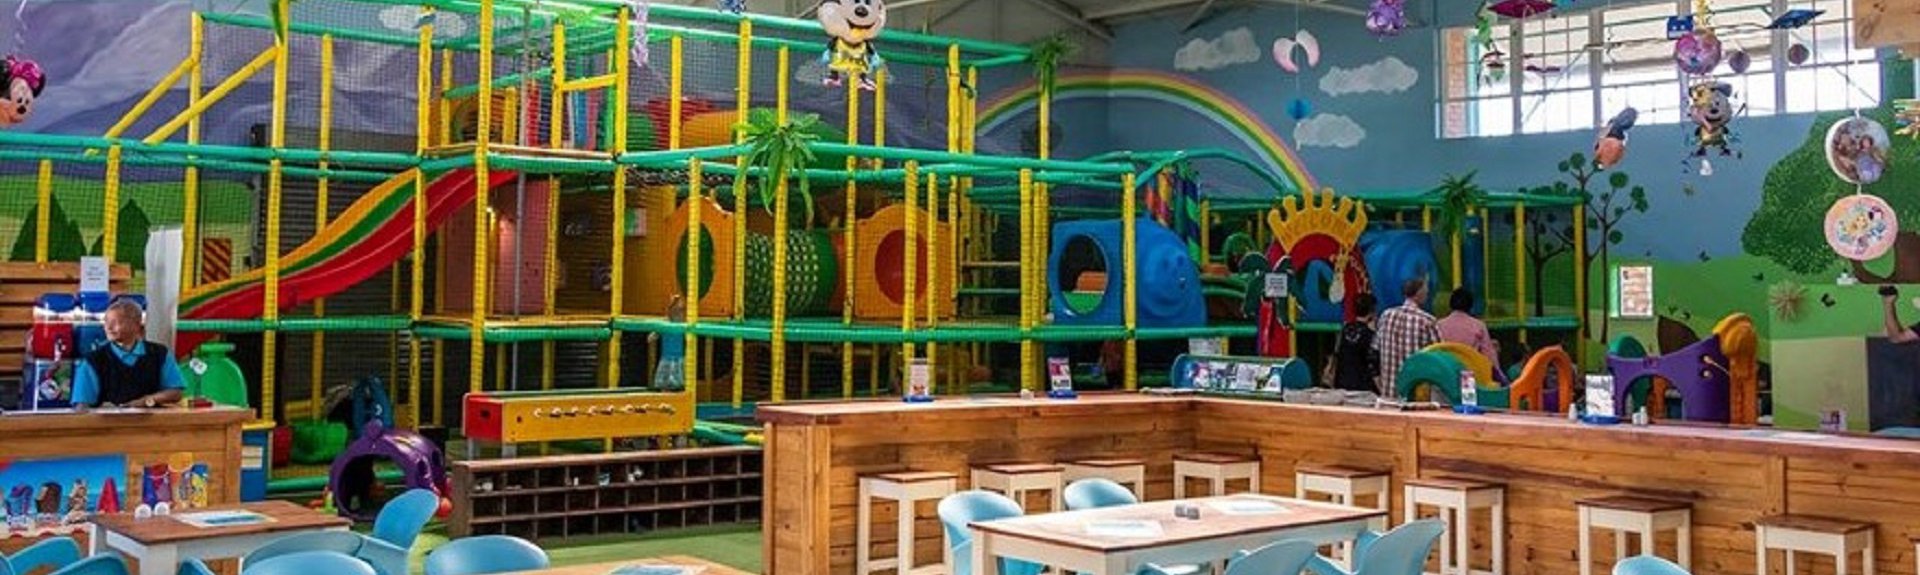 Happy Vally Kids Play Centre | Garden Route | Things to do With Kids